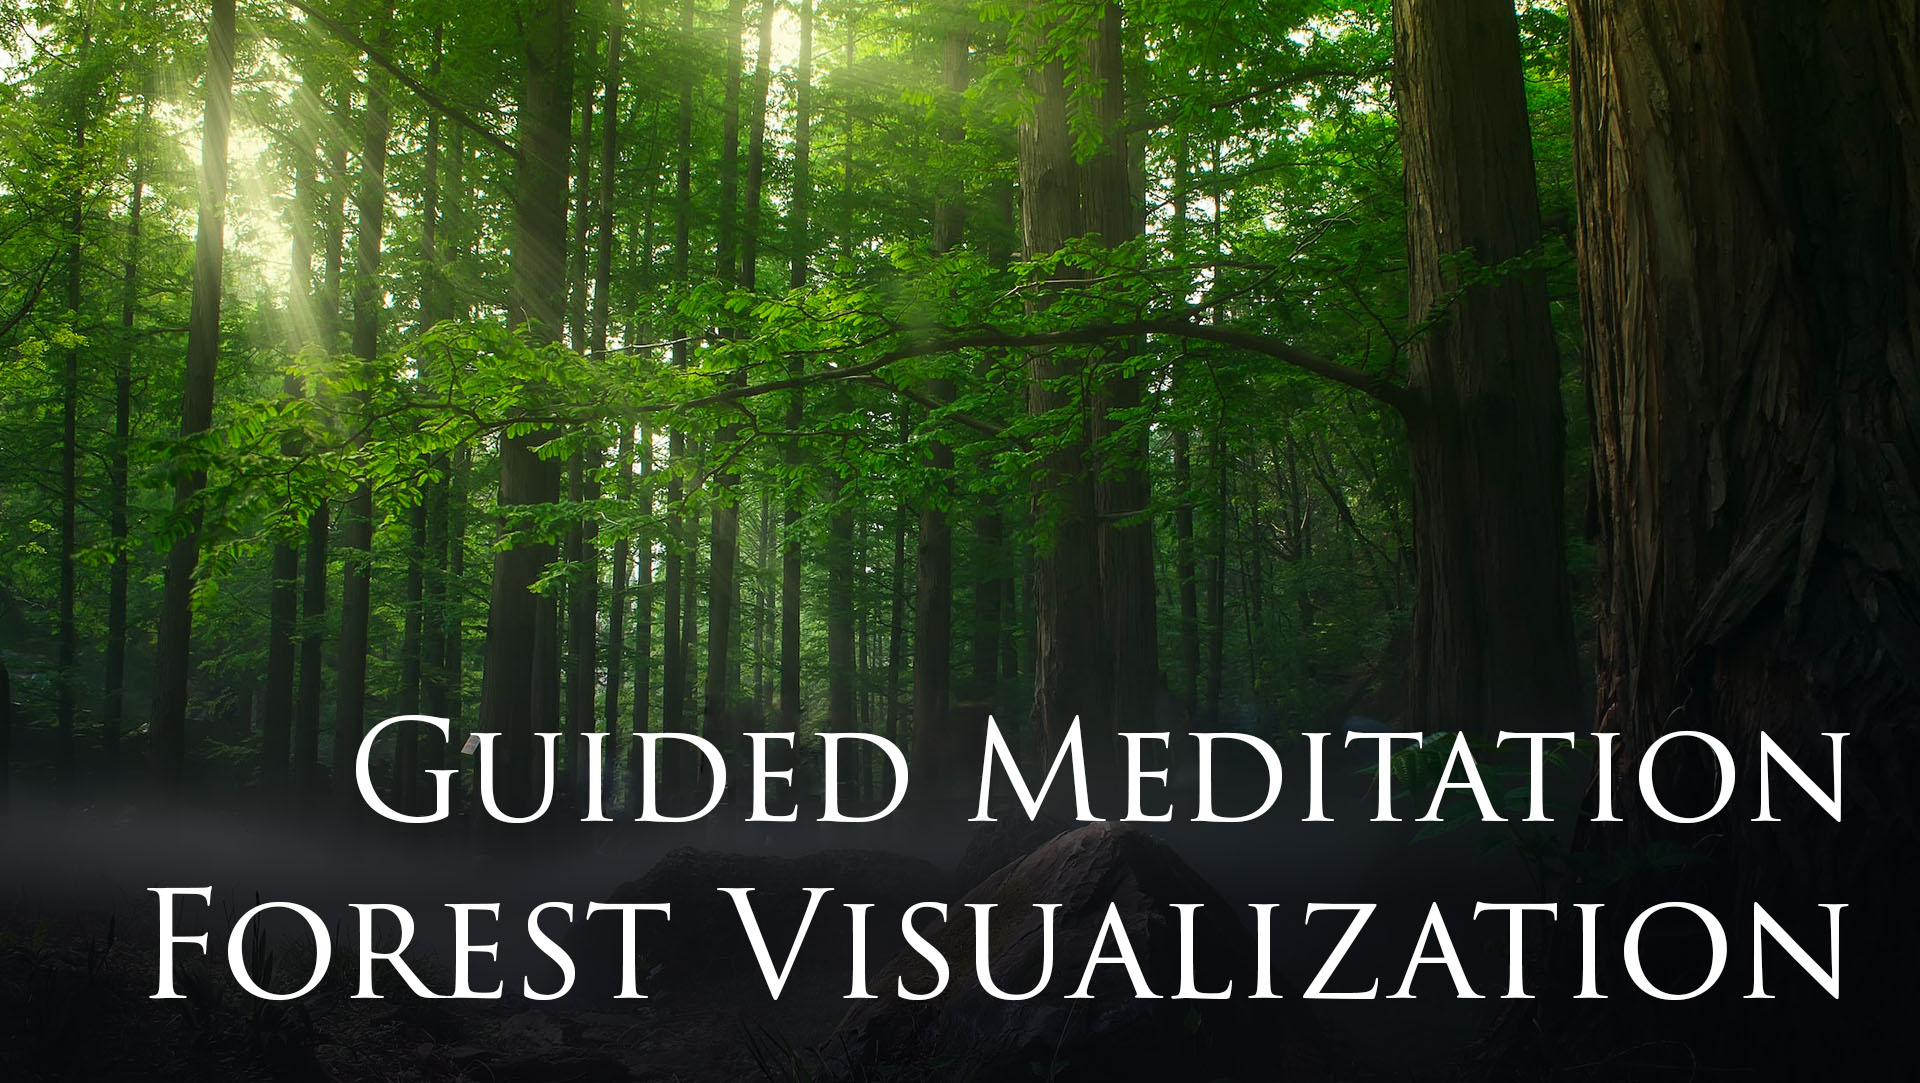 Guided Meditation - Forest Visualization